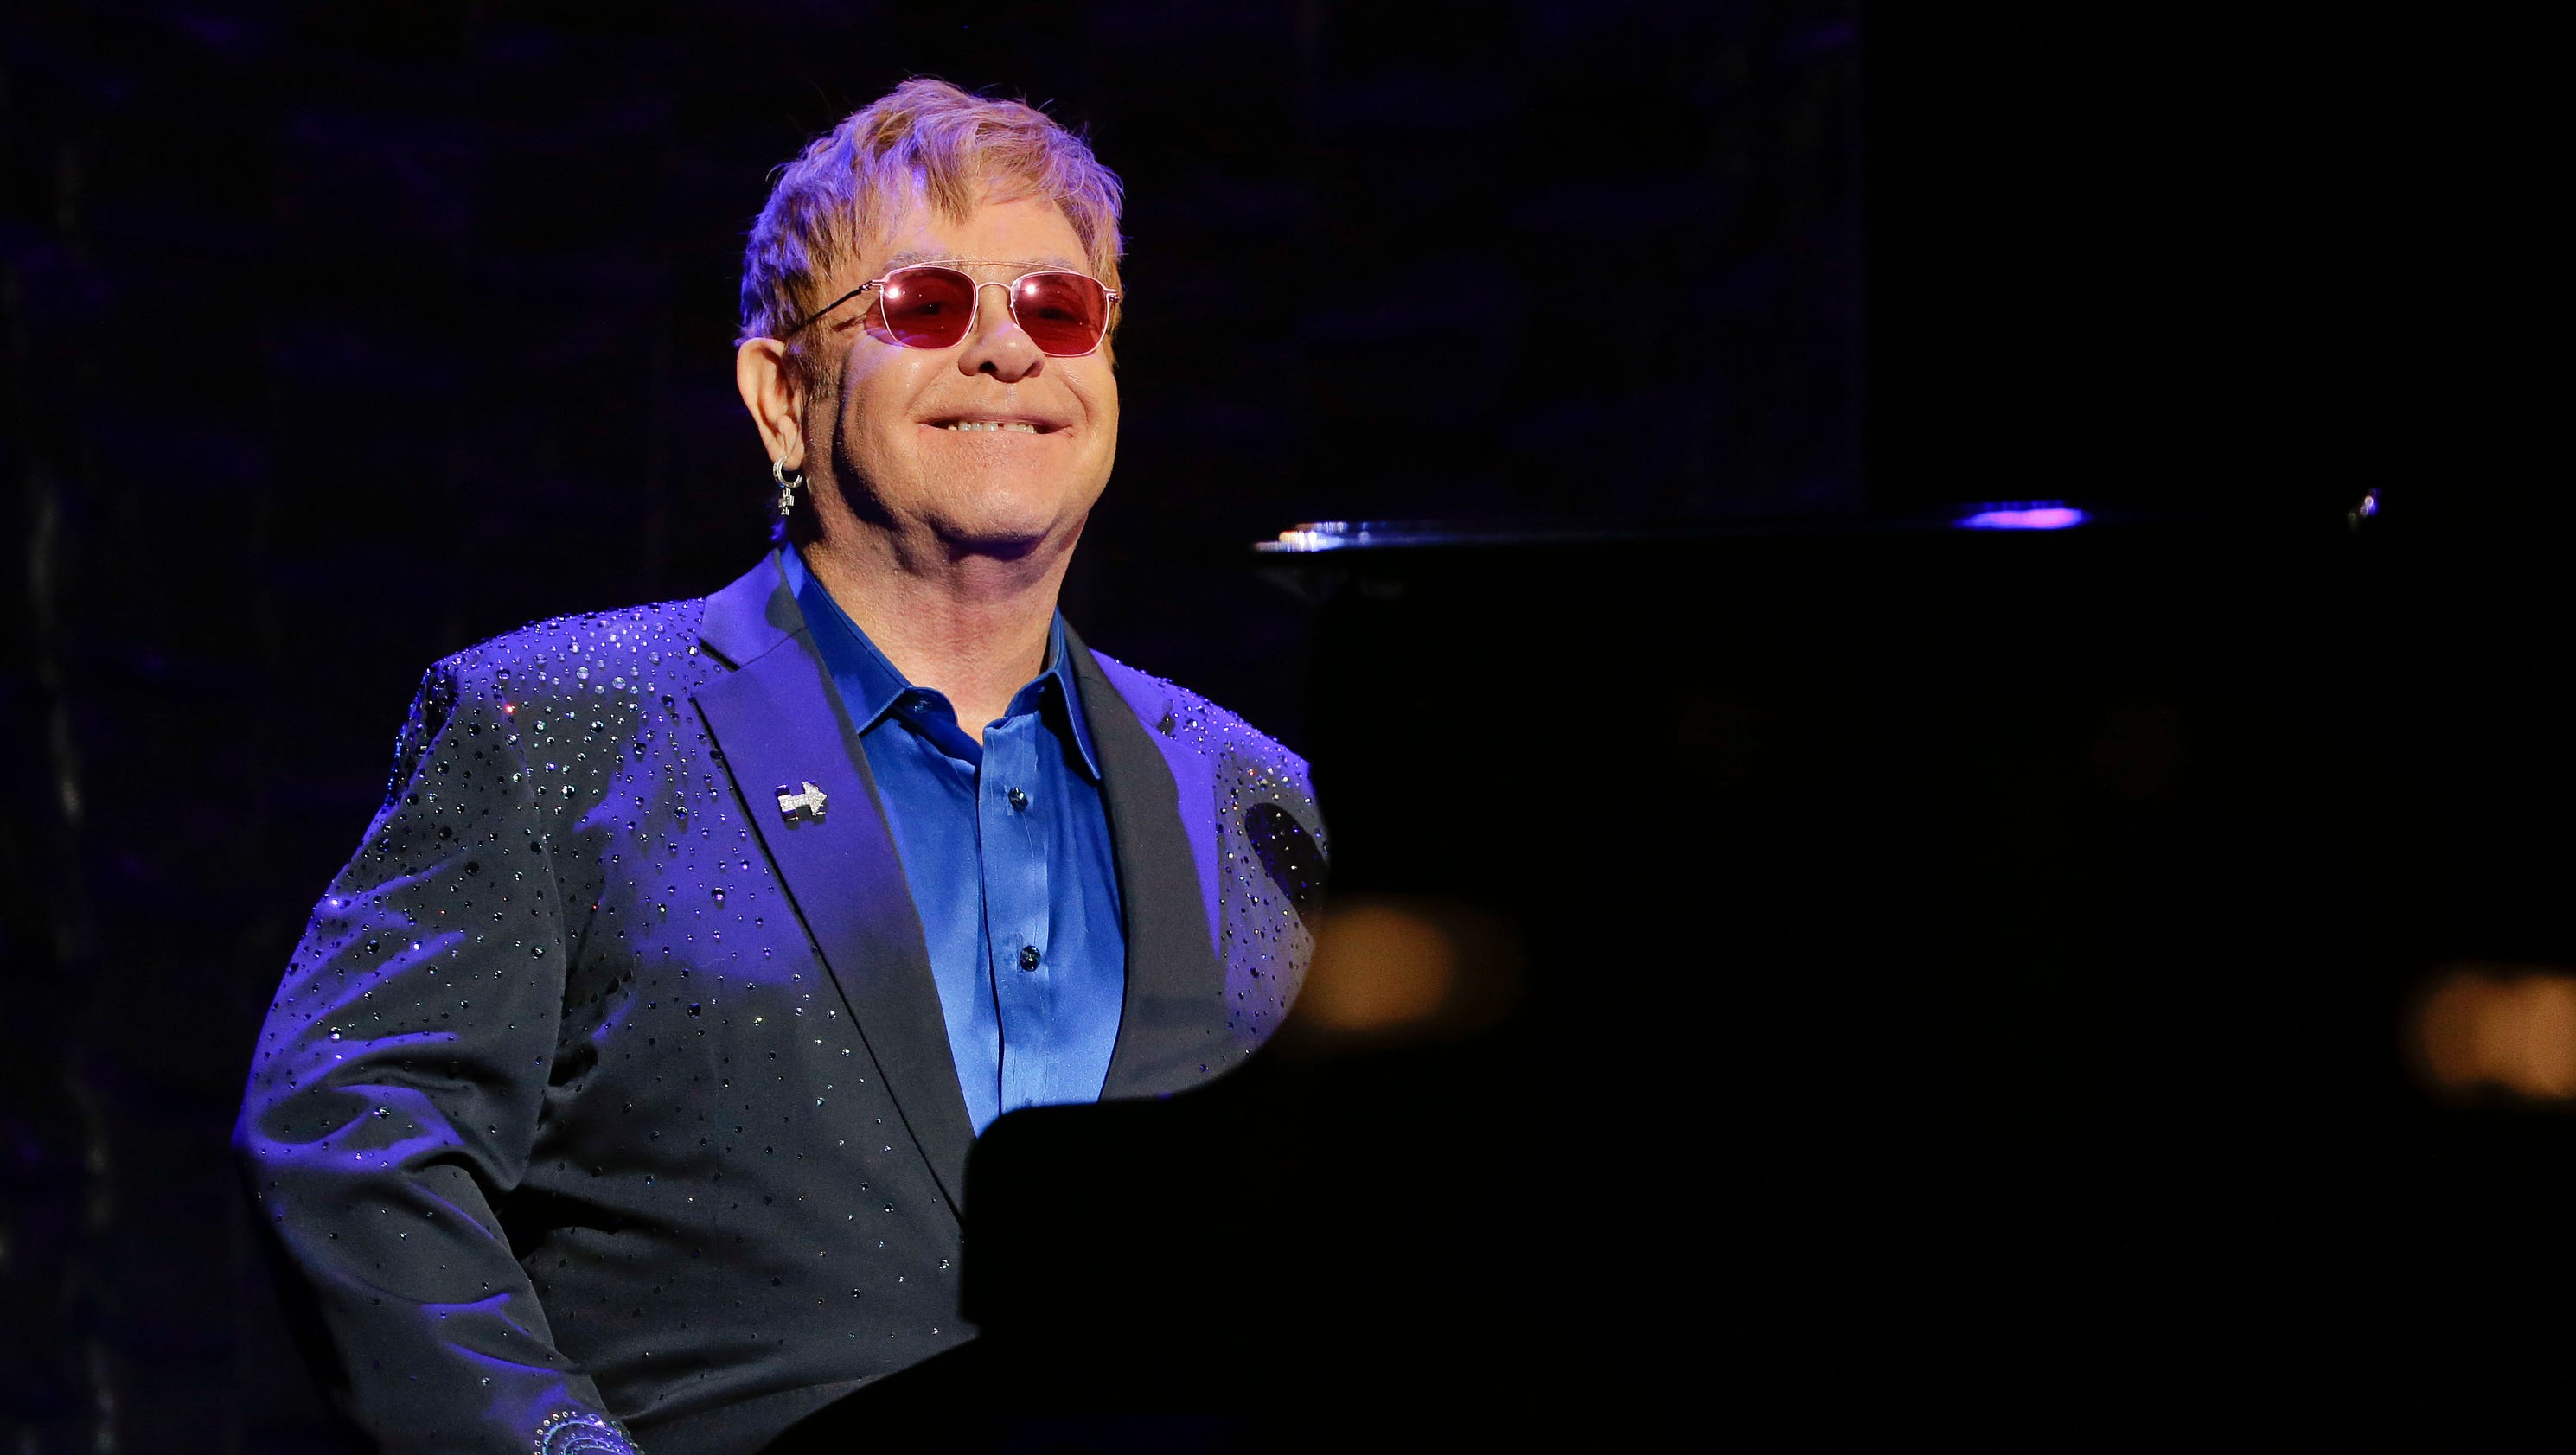 Elton John chastises N.C. for 'failure of compassion' on bathroom issue3200 x 1680